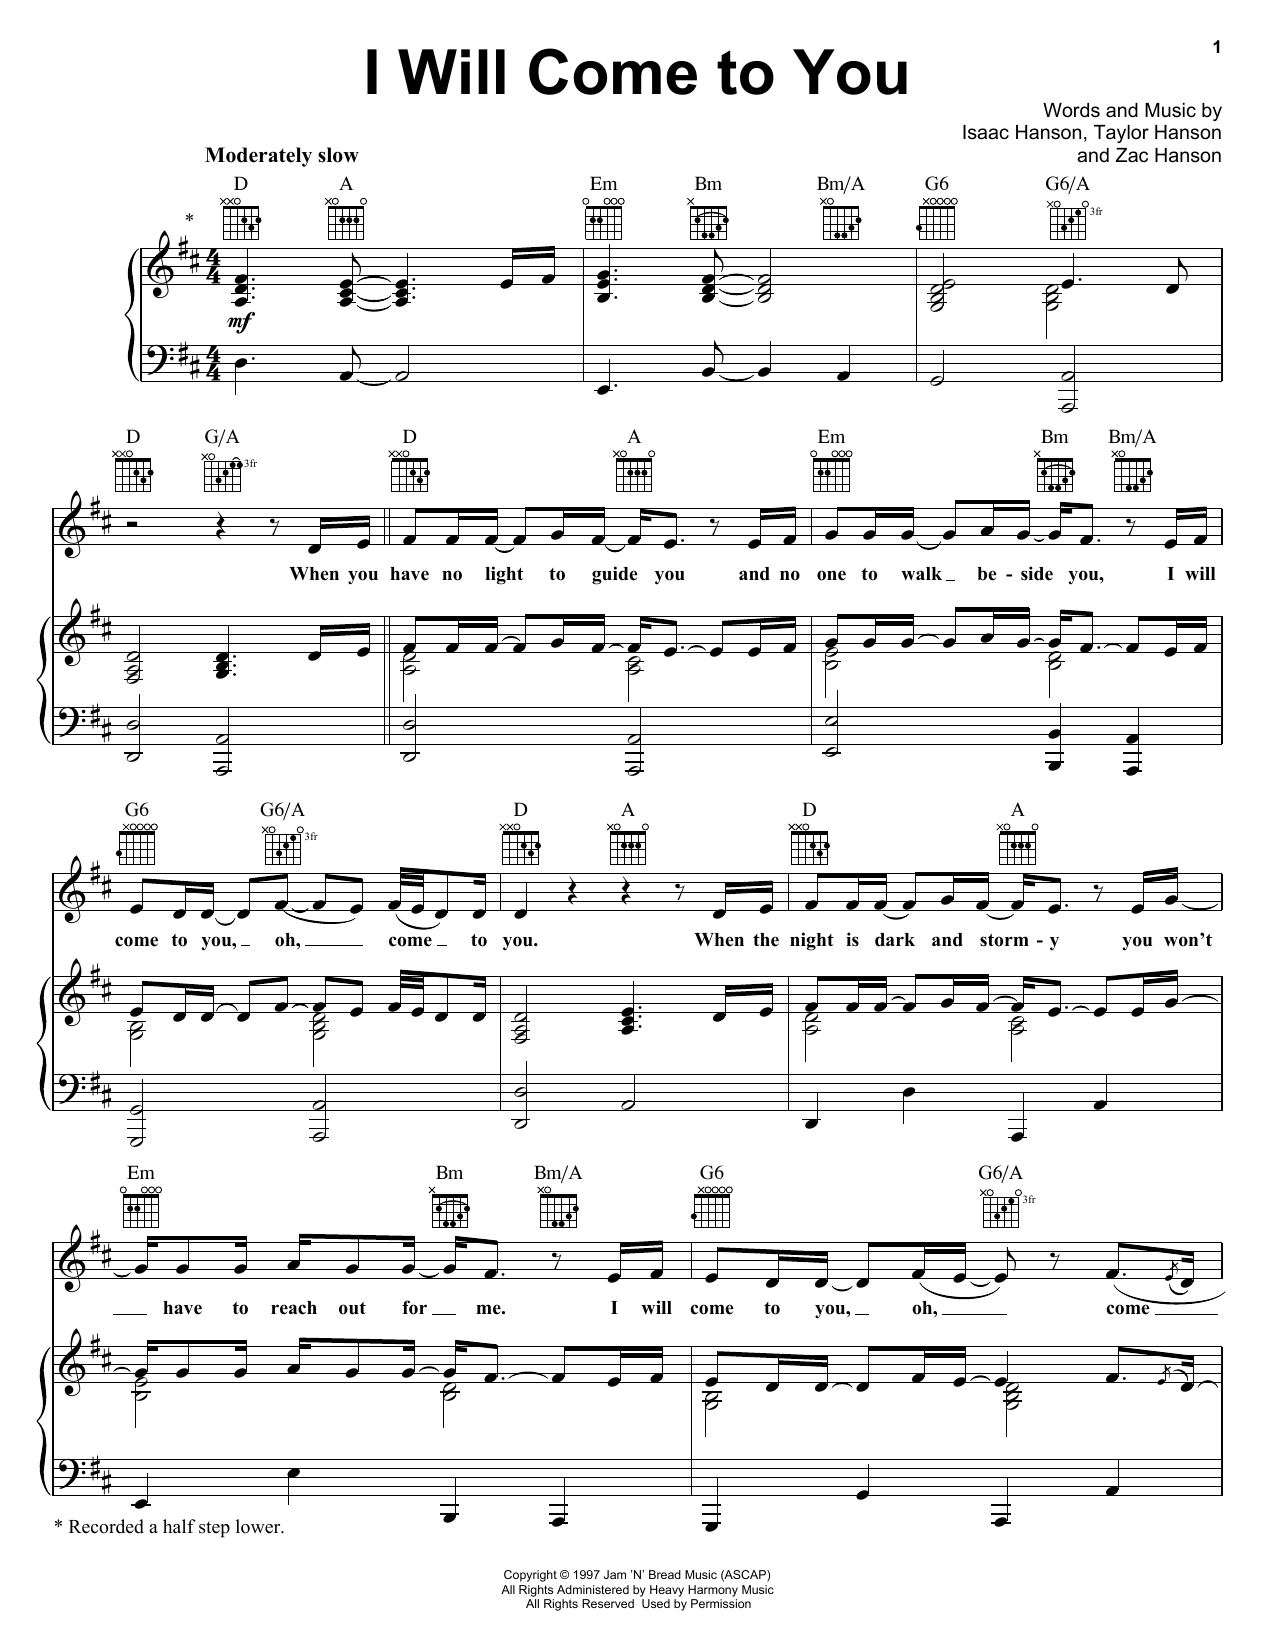 Download Hanson I Will Come To You Sheet Music